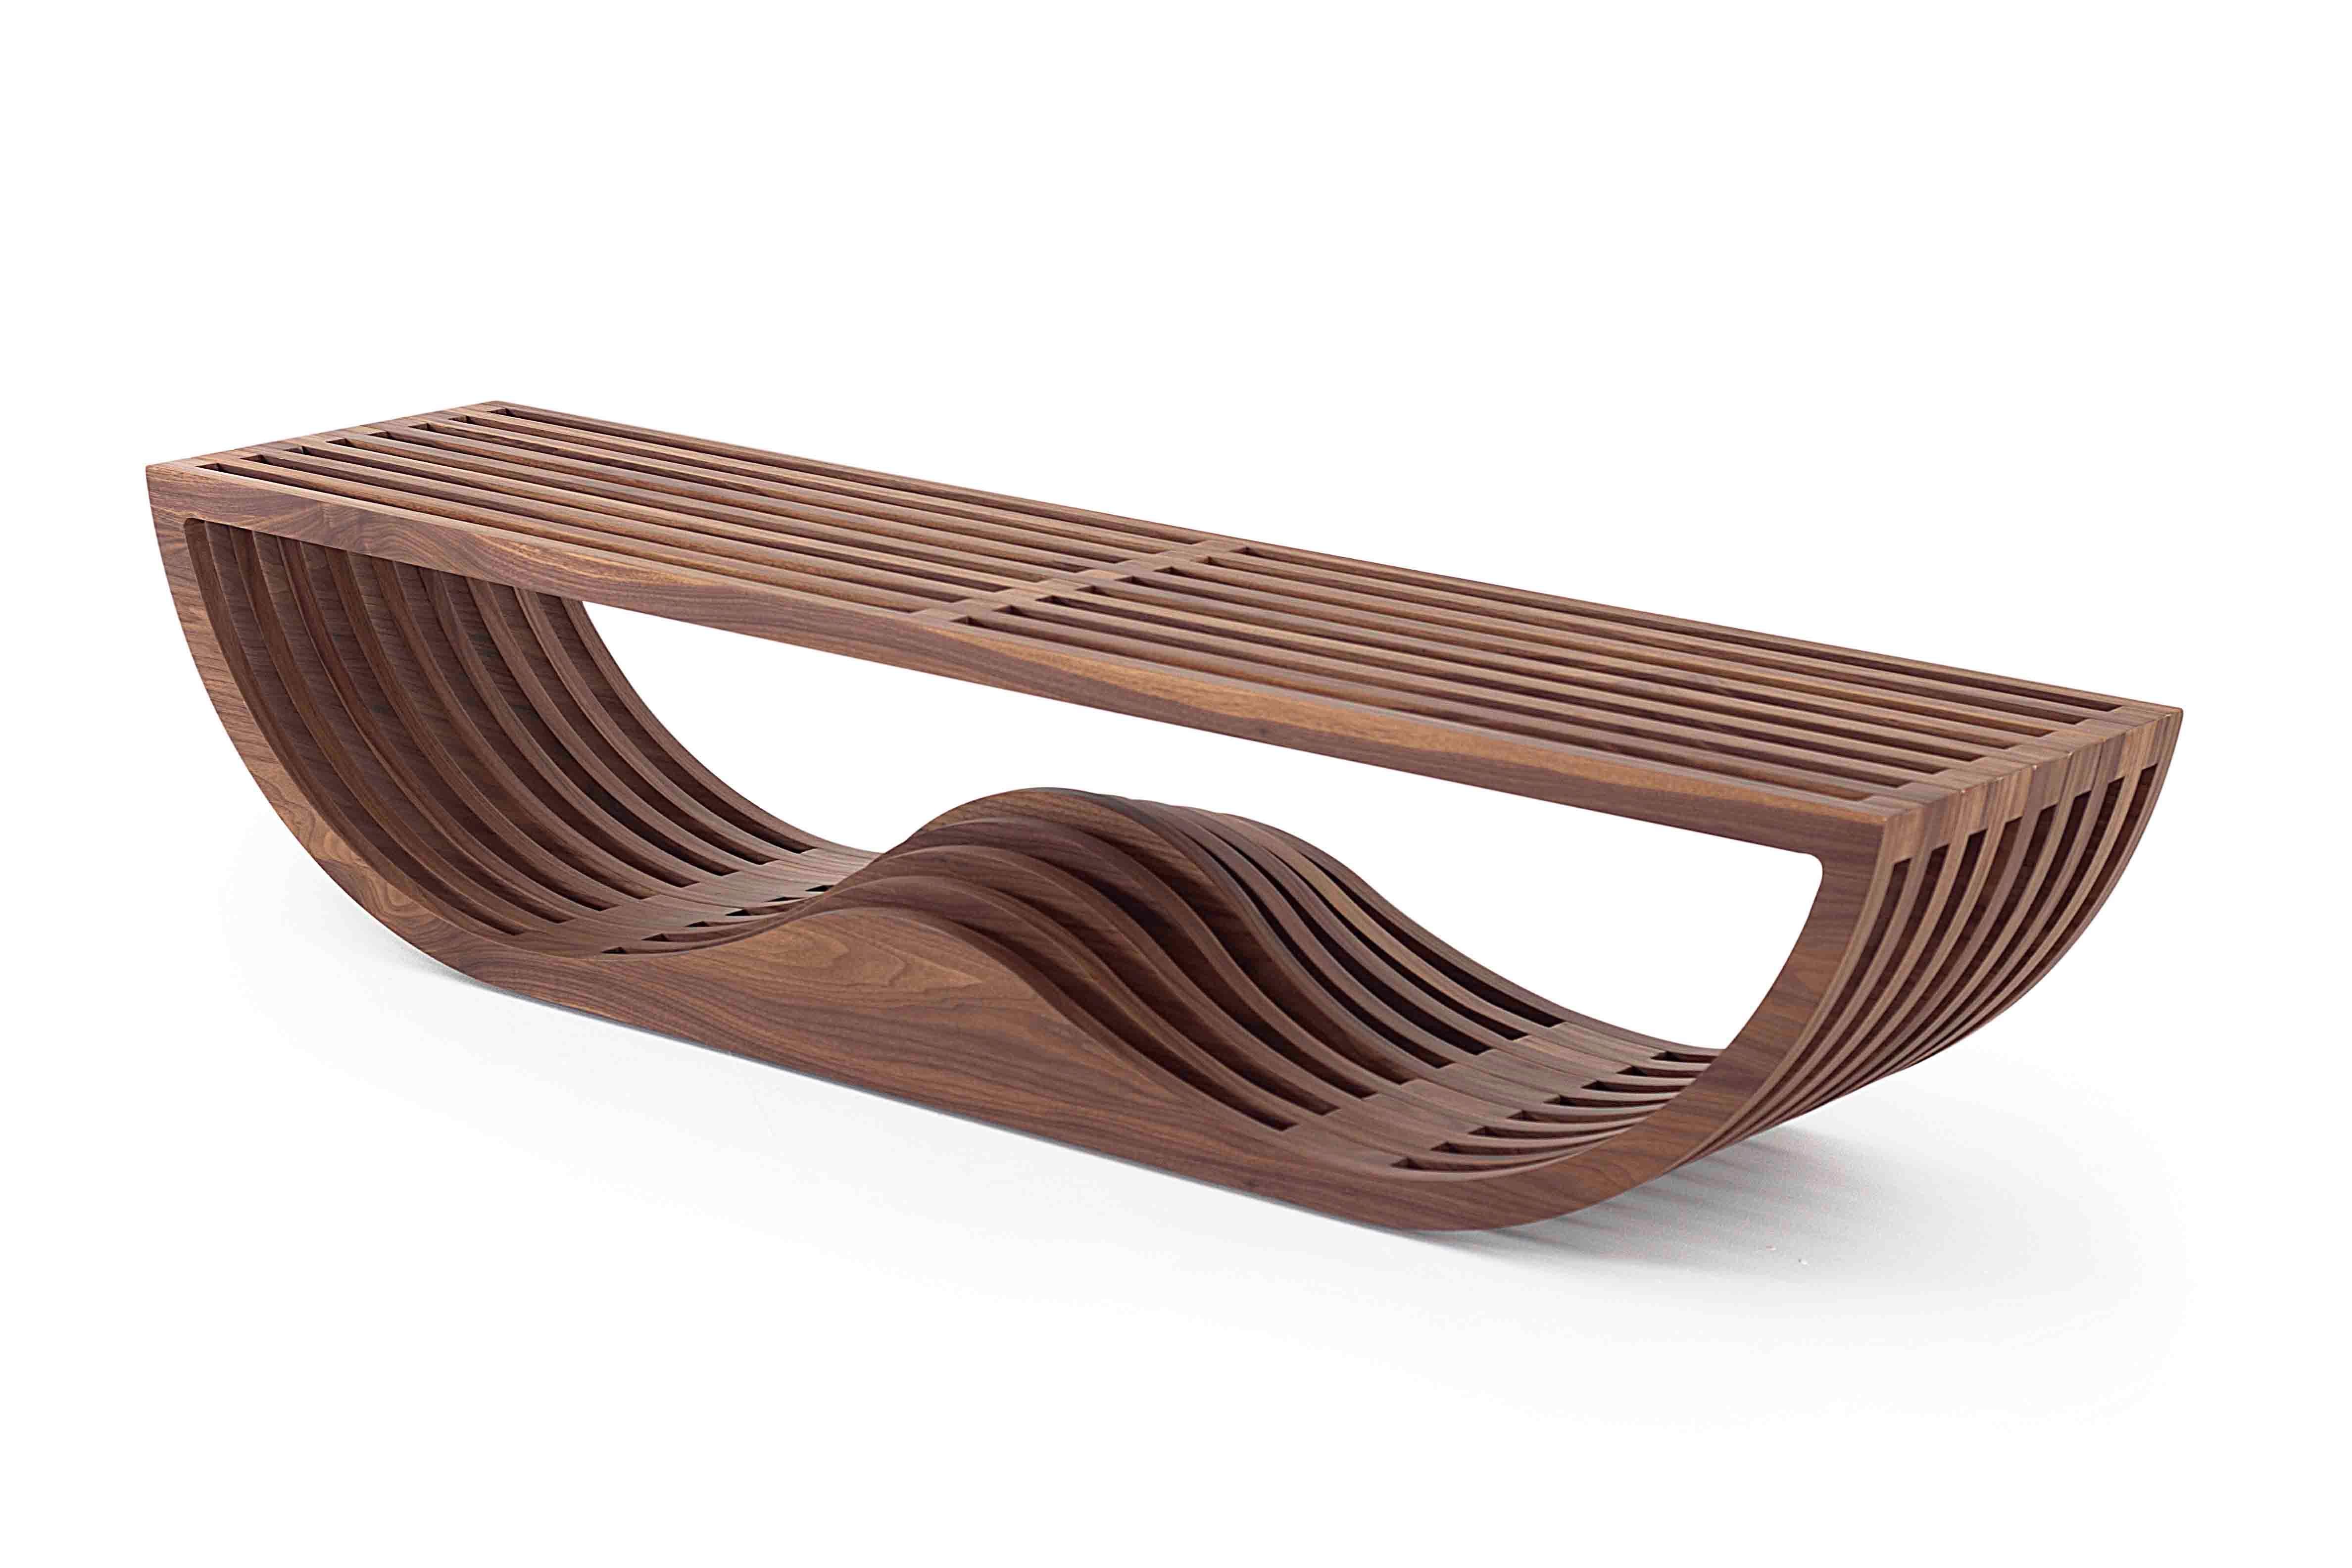 Brazilian walnut wood, a bench with a natural and sophisticated beauty modern shape to improve the home space you want.

Studiokaza products are available in different finishes. 